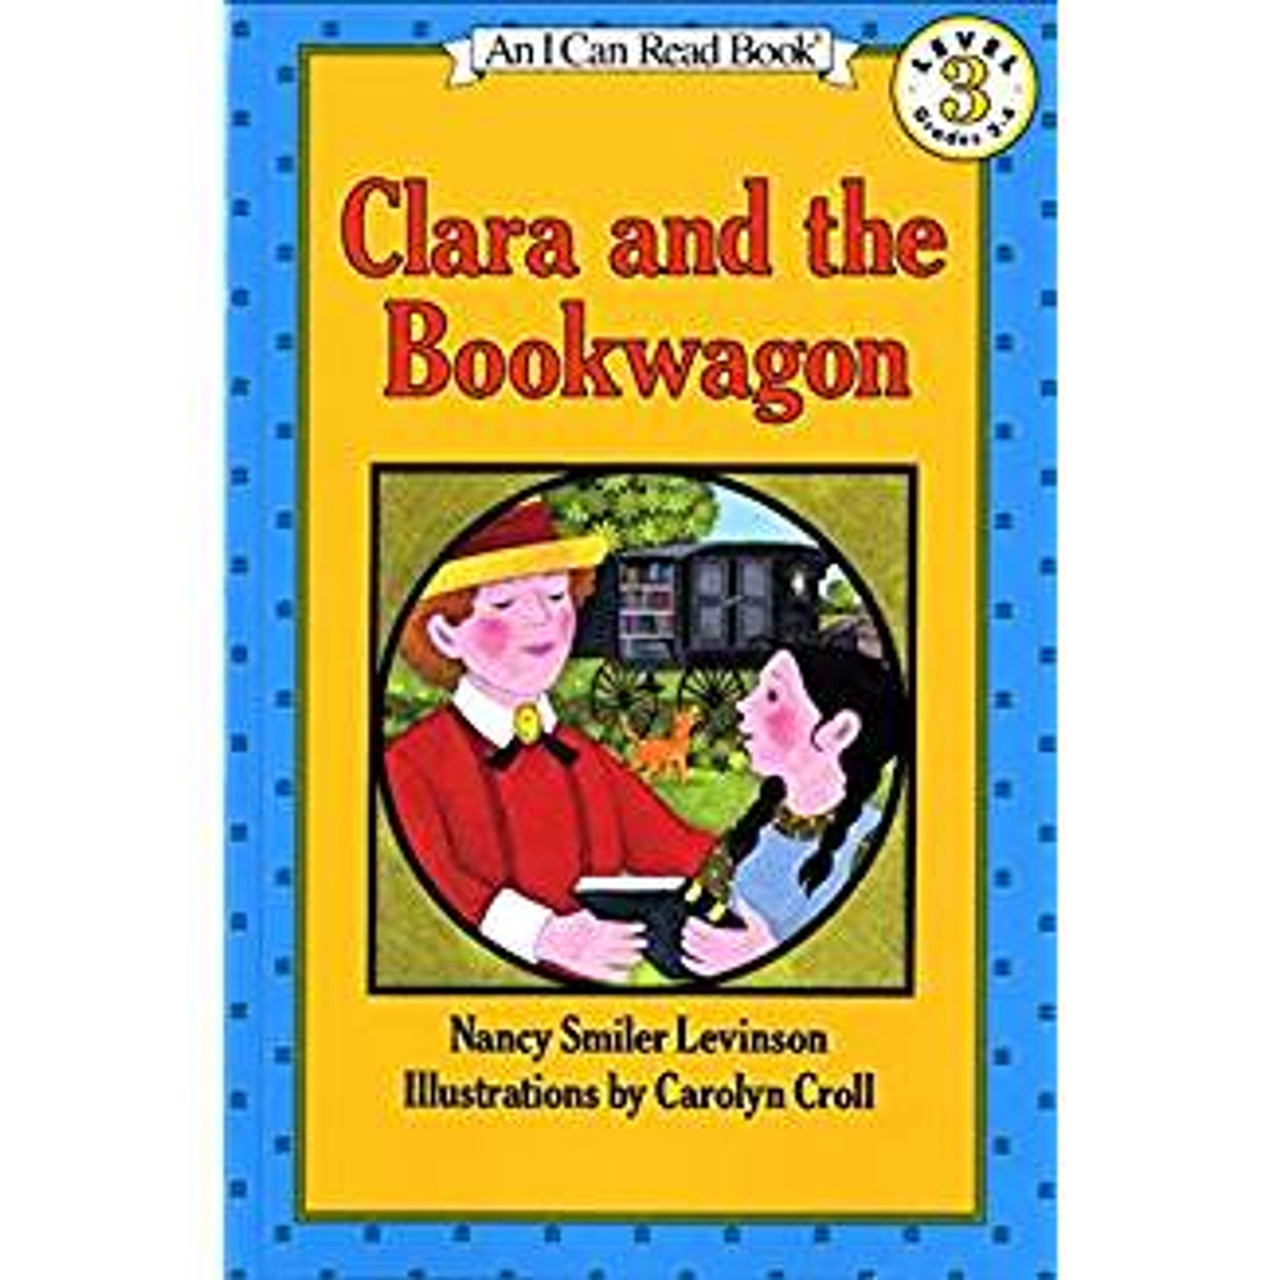  Clara's dream of enriching her rough life on the family farm is fulfilled when a horse-drawn book wagon visits with the country's first traveling library.